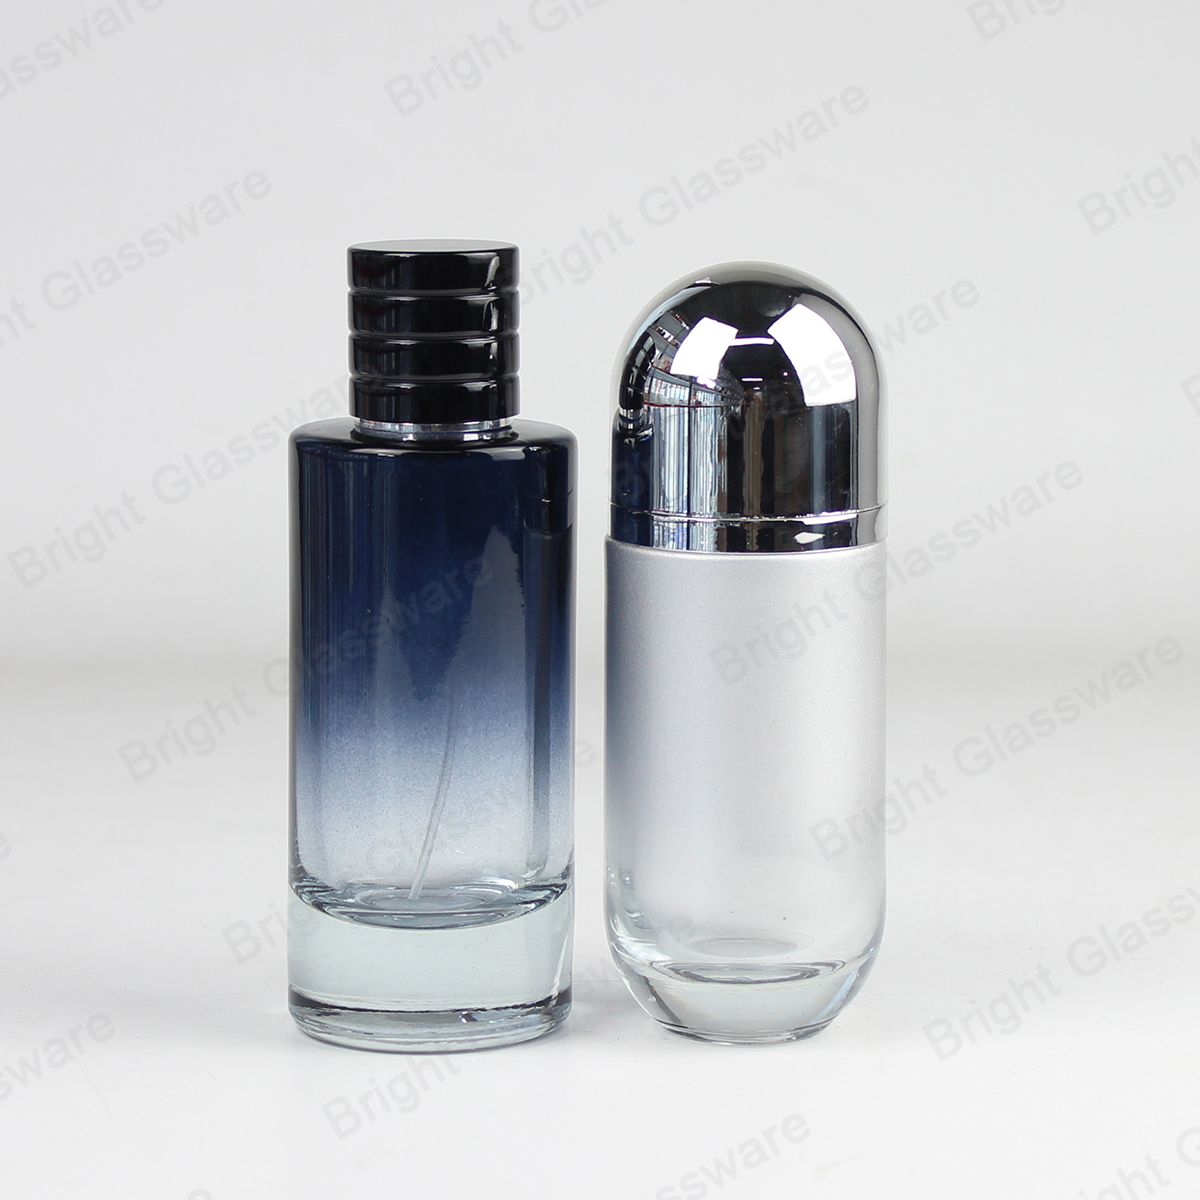 Luxury Silver Portable Refillable Glass Perfume Bottles With Spray Cap